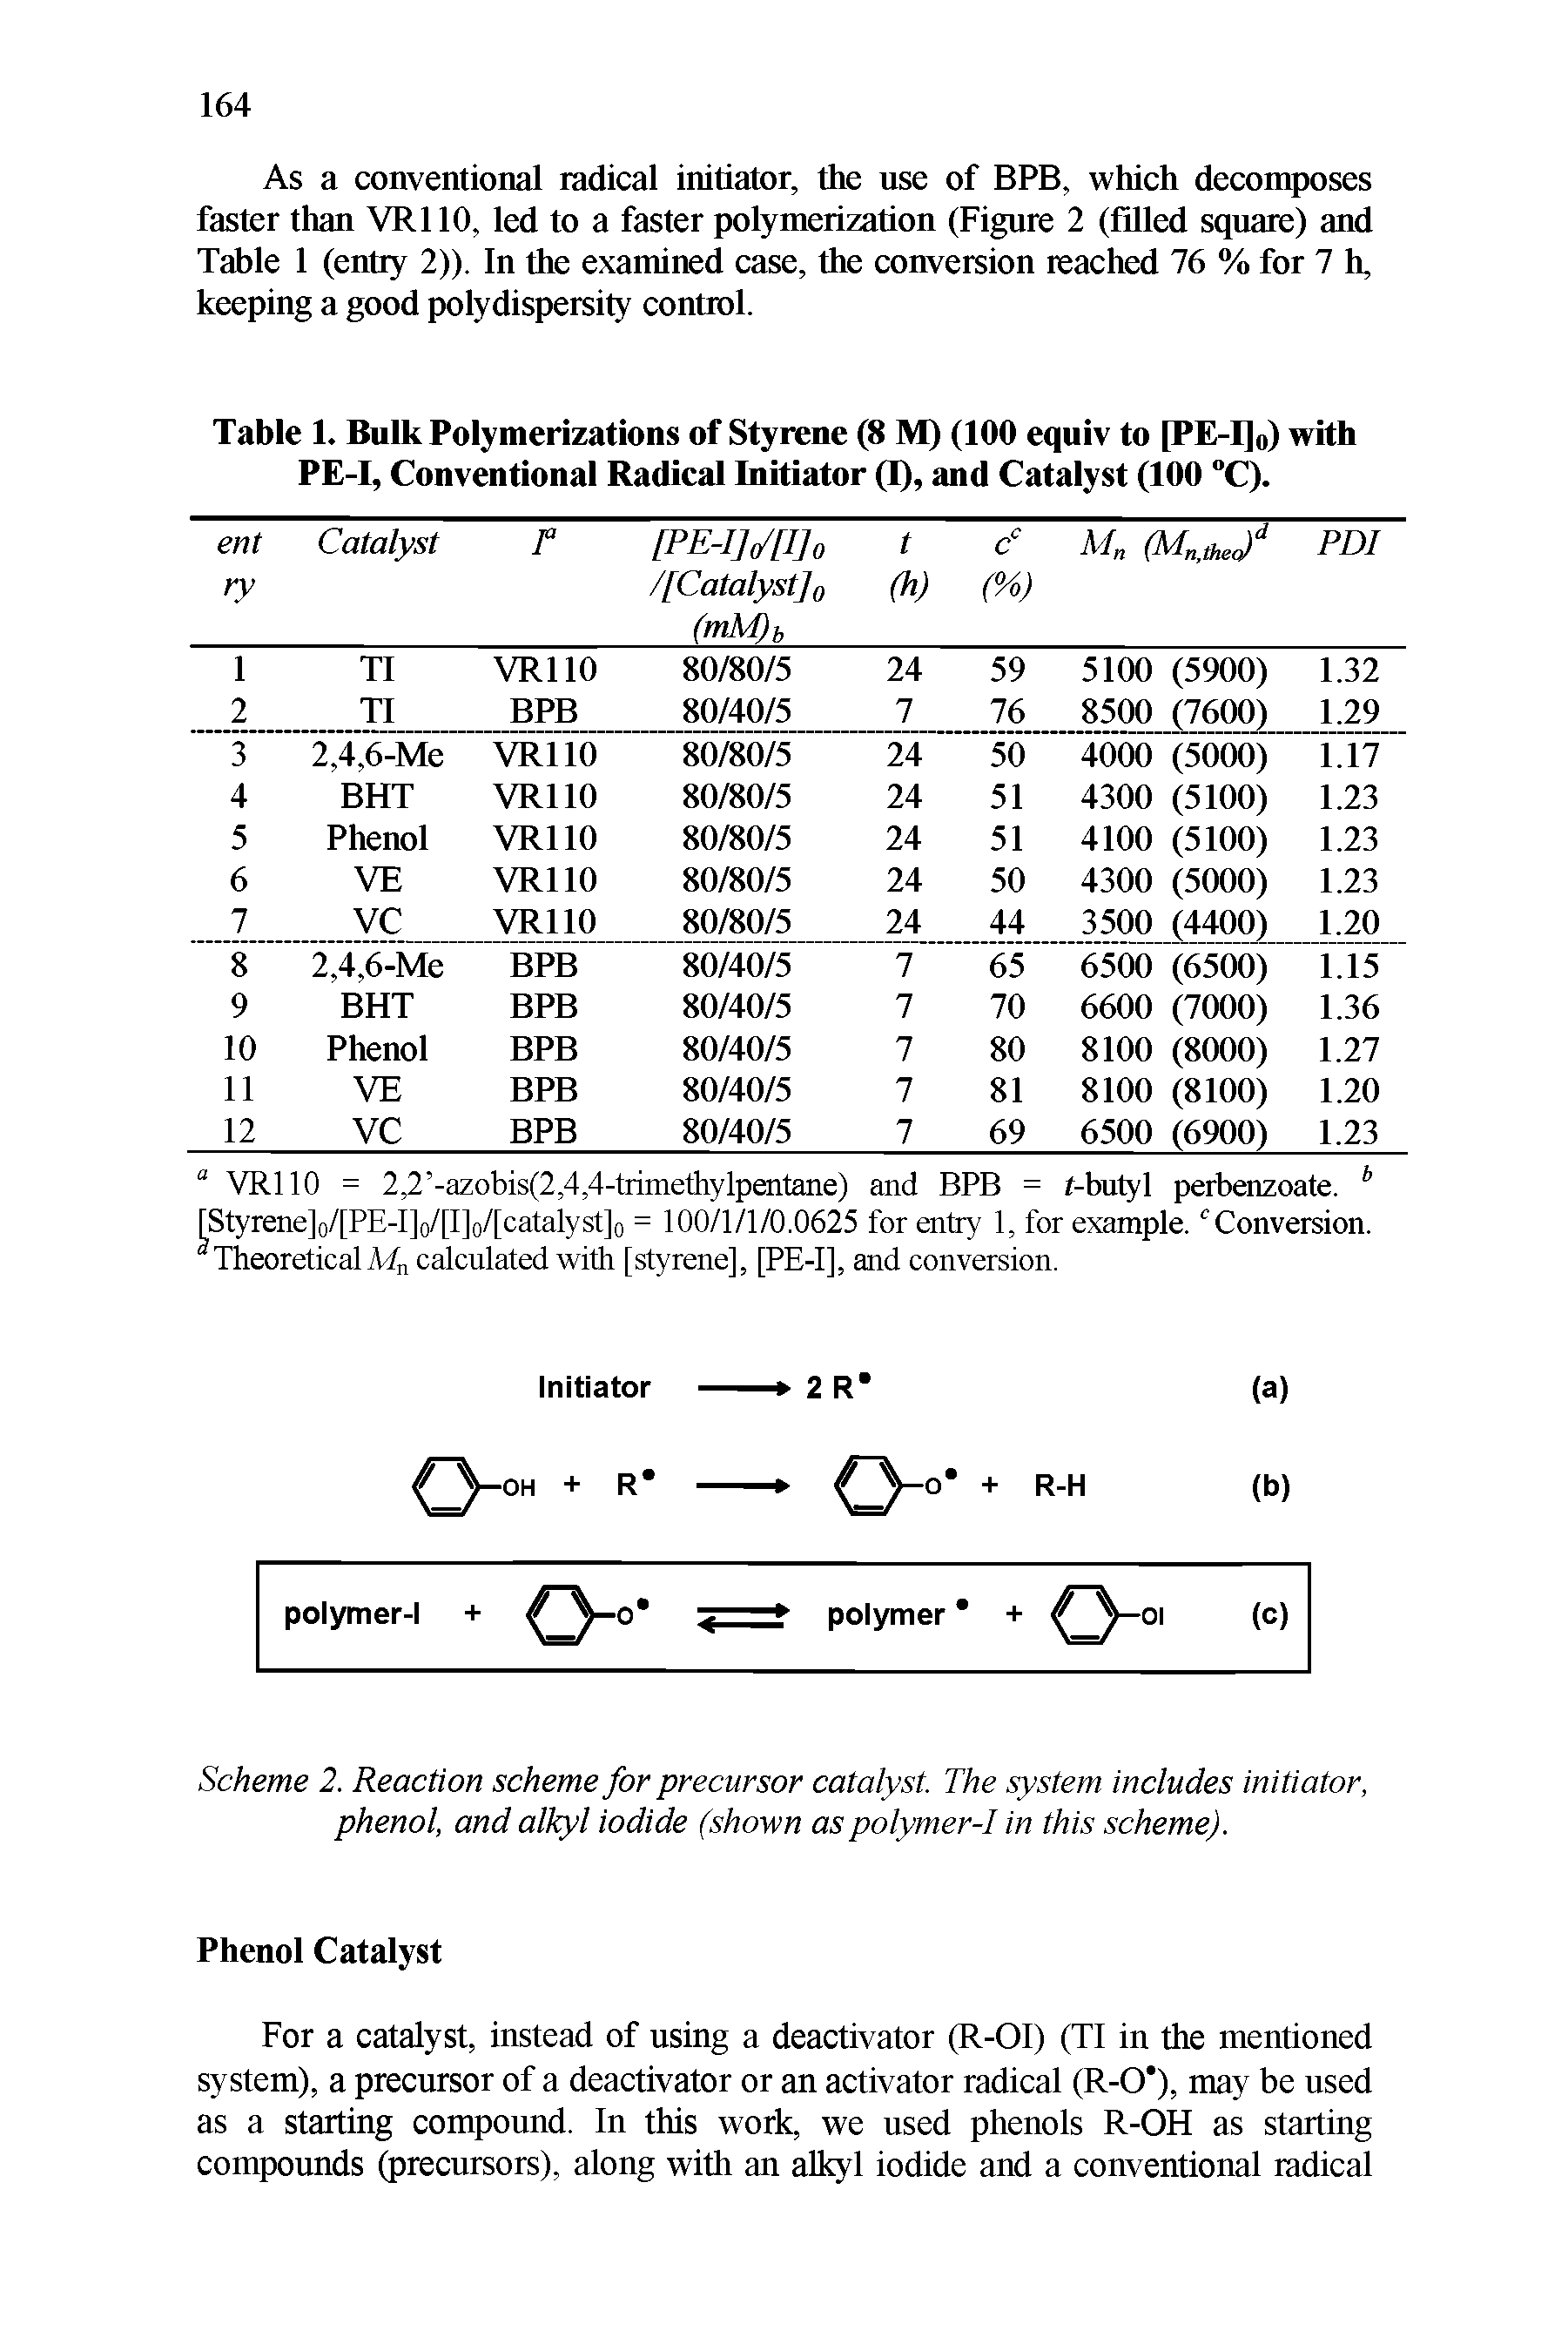 Table 1. Bulk Polymerizations of Styrene (8 M) (100 equiv to [PE-I]o) with PE-I, Conventional Radical Initiator (I), and Catalyst (100 "C).